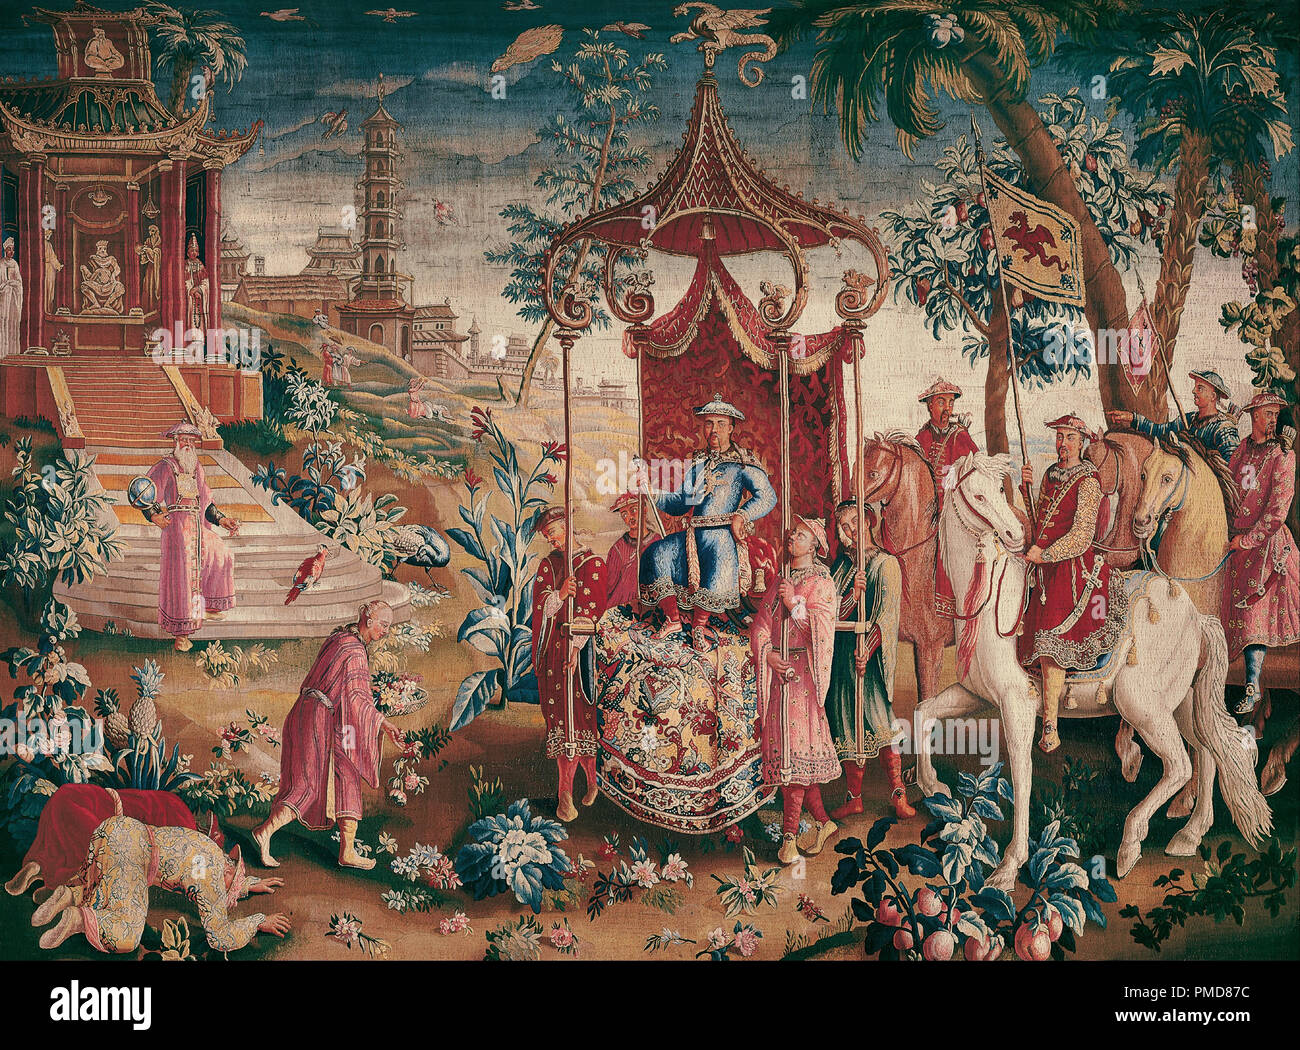 The Prince's Journey. Date/Period: 1700. Tapestry. Wool and silk. Height: 3,550 mm (11.64 ft); Width: 4,370 mm (14.33 ft). Author: Royal Beauvais Manufactory. ANONYMOUS. Stock Photo